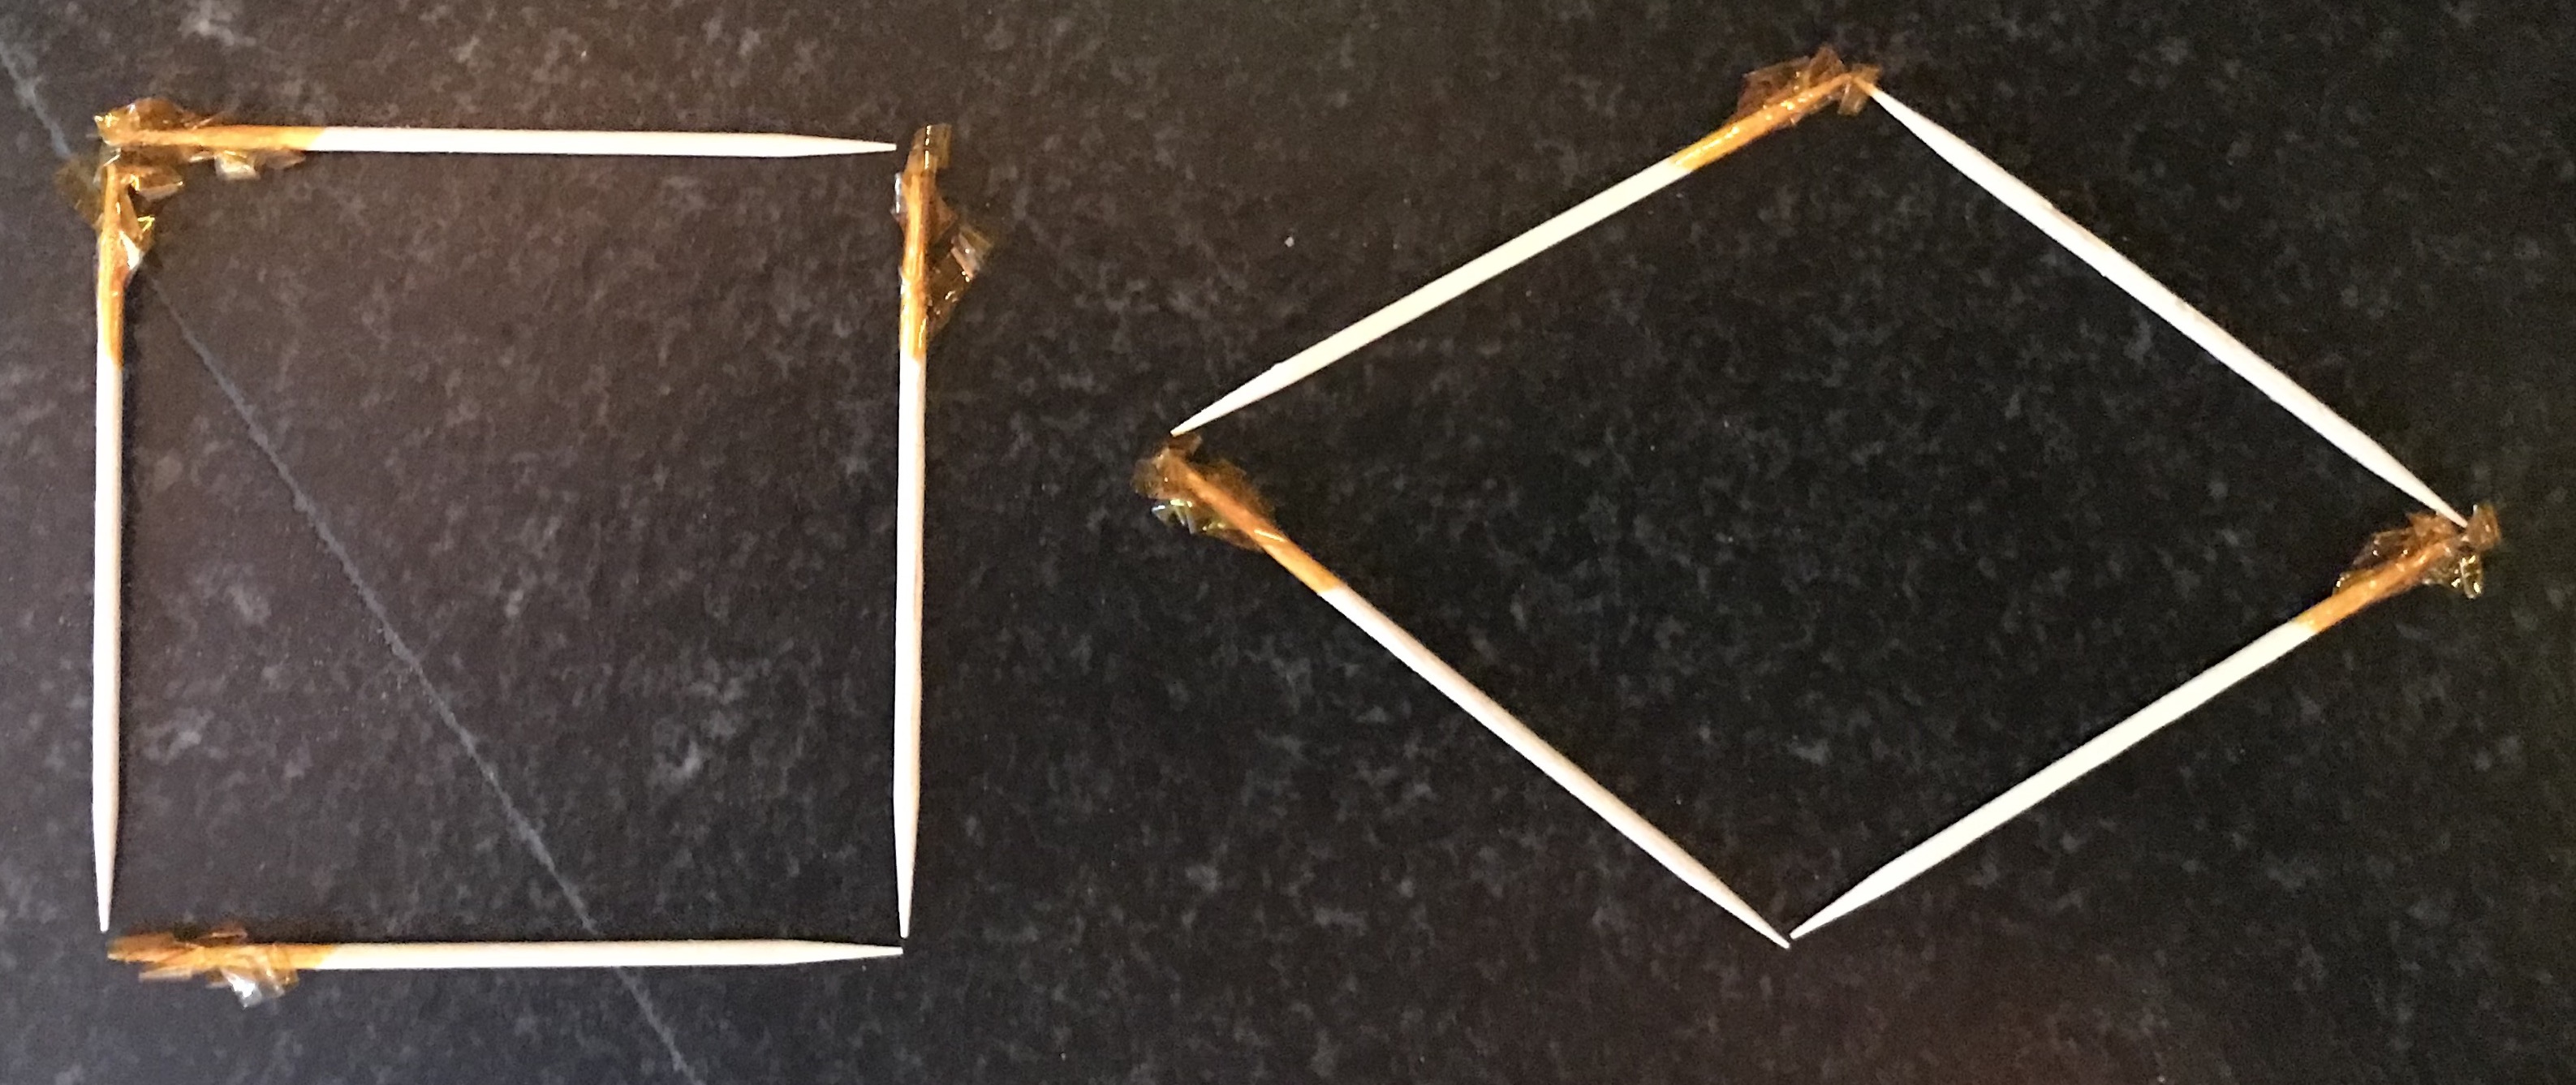 toothpicks forming 2 shapes. left, square. right, rhombus.